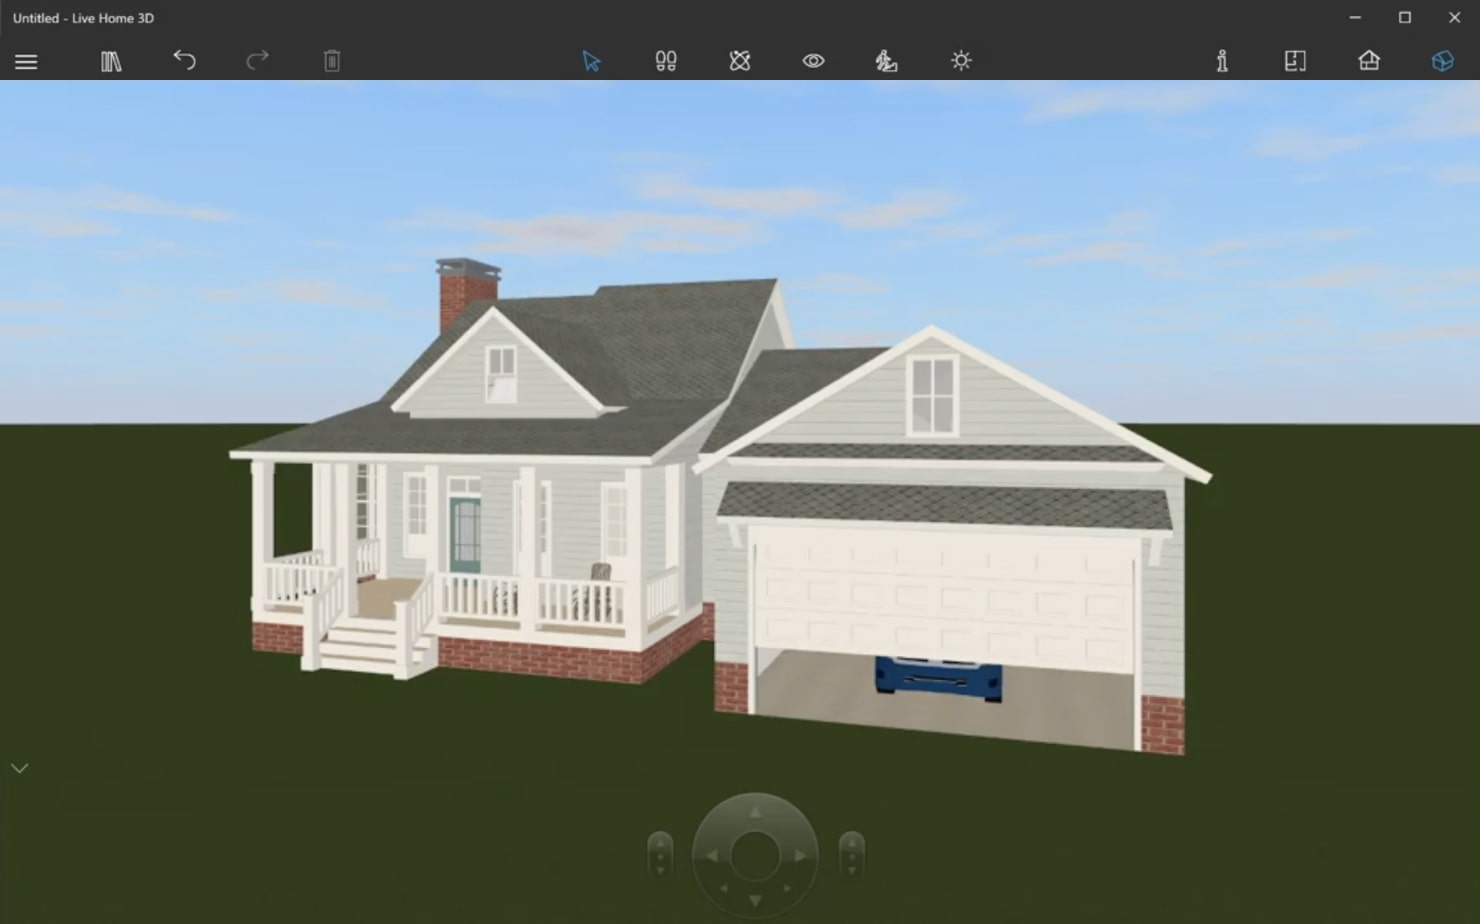 A screenshot of a ready split level house project created in Live Home 3D.